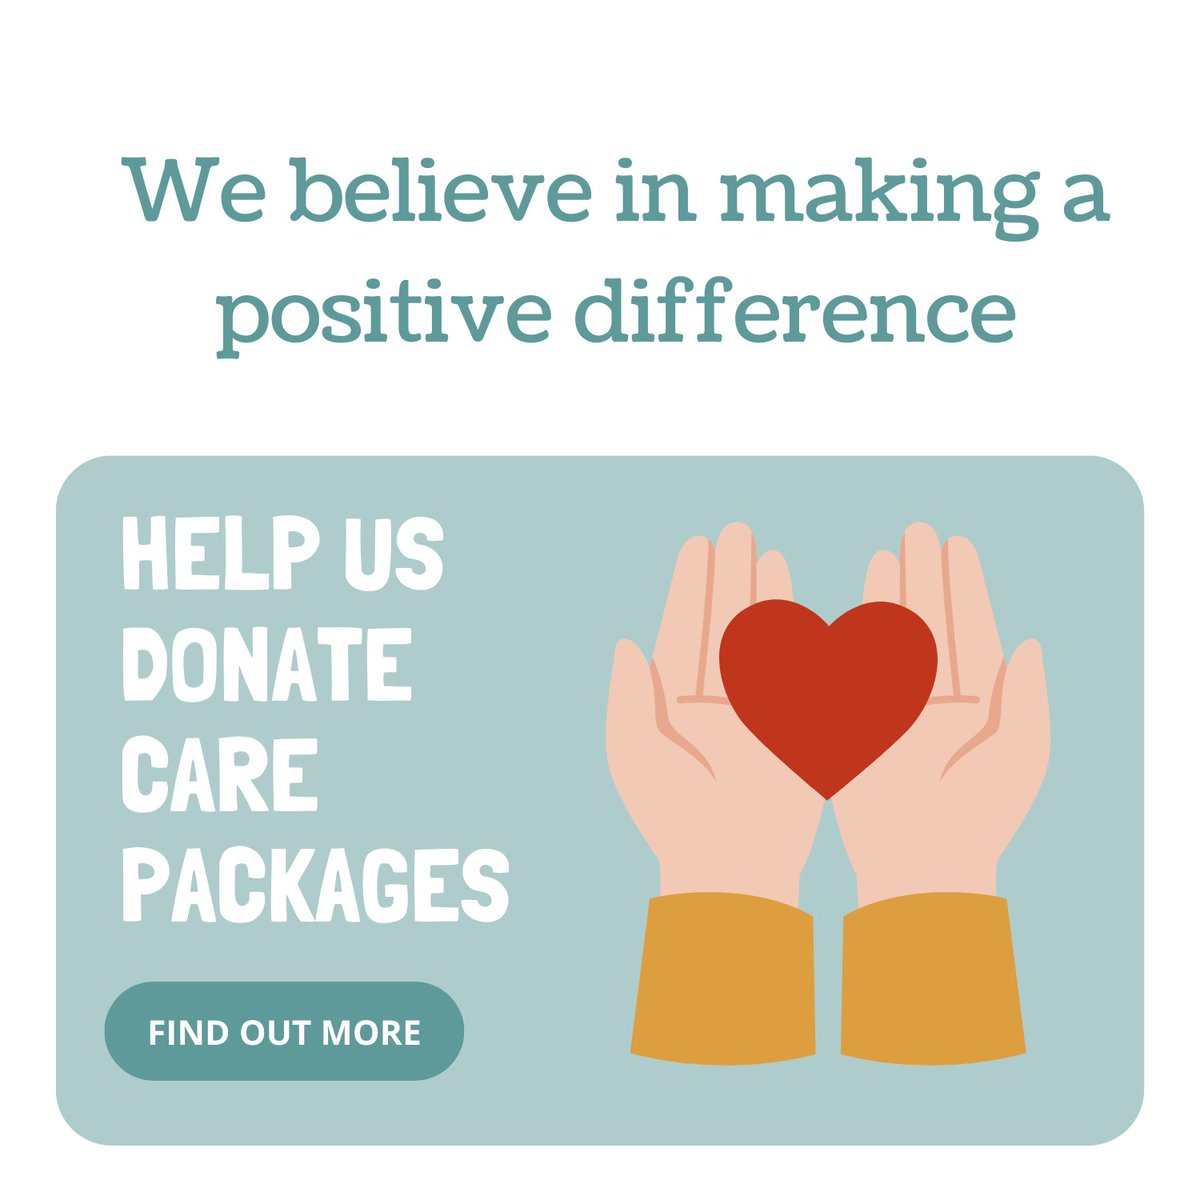 Join us in creating a positive impact! 🌟 Your support can make a difference. Help us donate care packages and spread kindness to those in need.

Click the link to donate.
gofundme.com/f/100CancerCar…
.
.
.
#DonateForGood #MakeADifference #SpreadKindness #Positive #CarePackageDonation